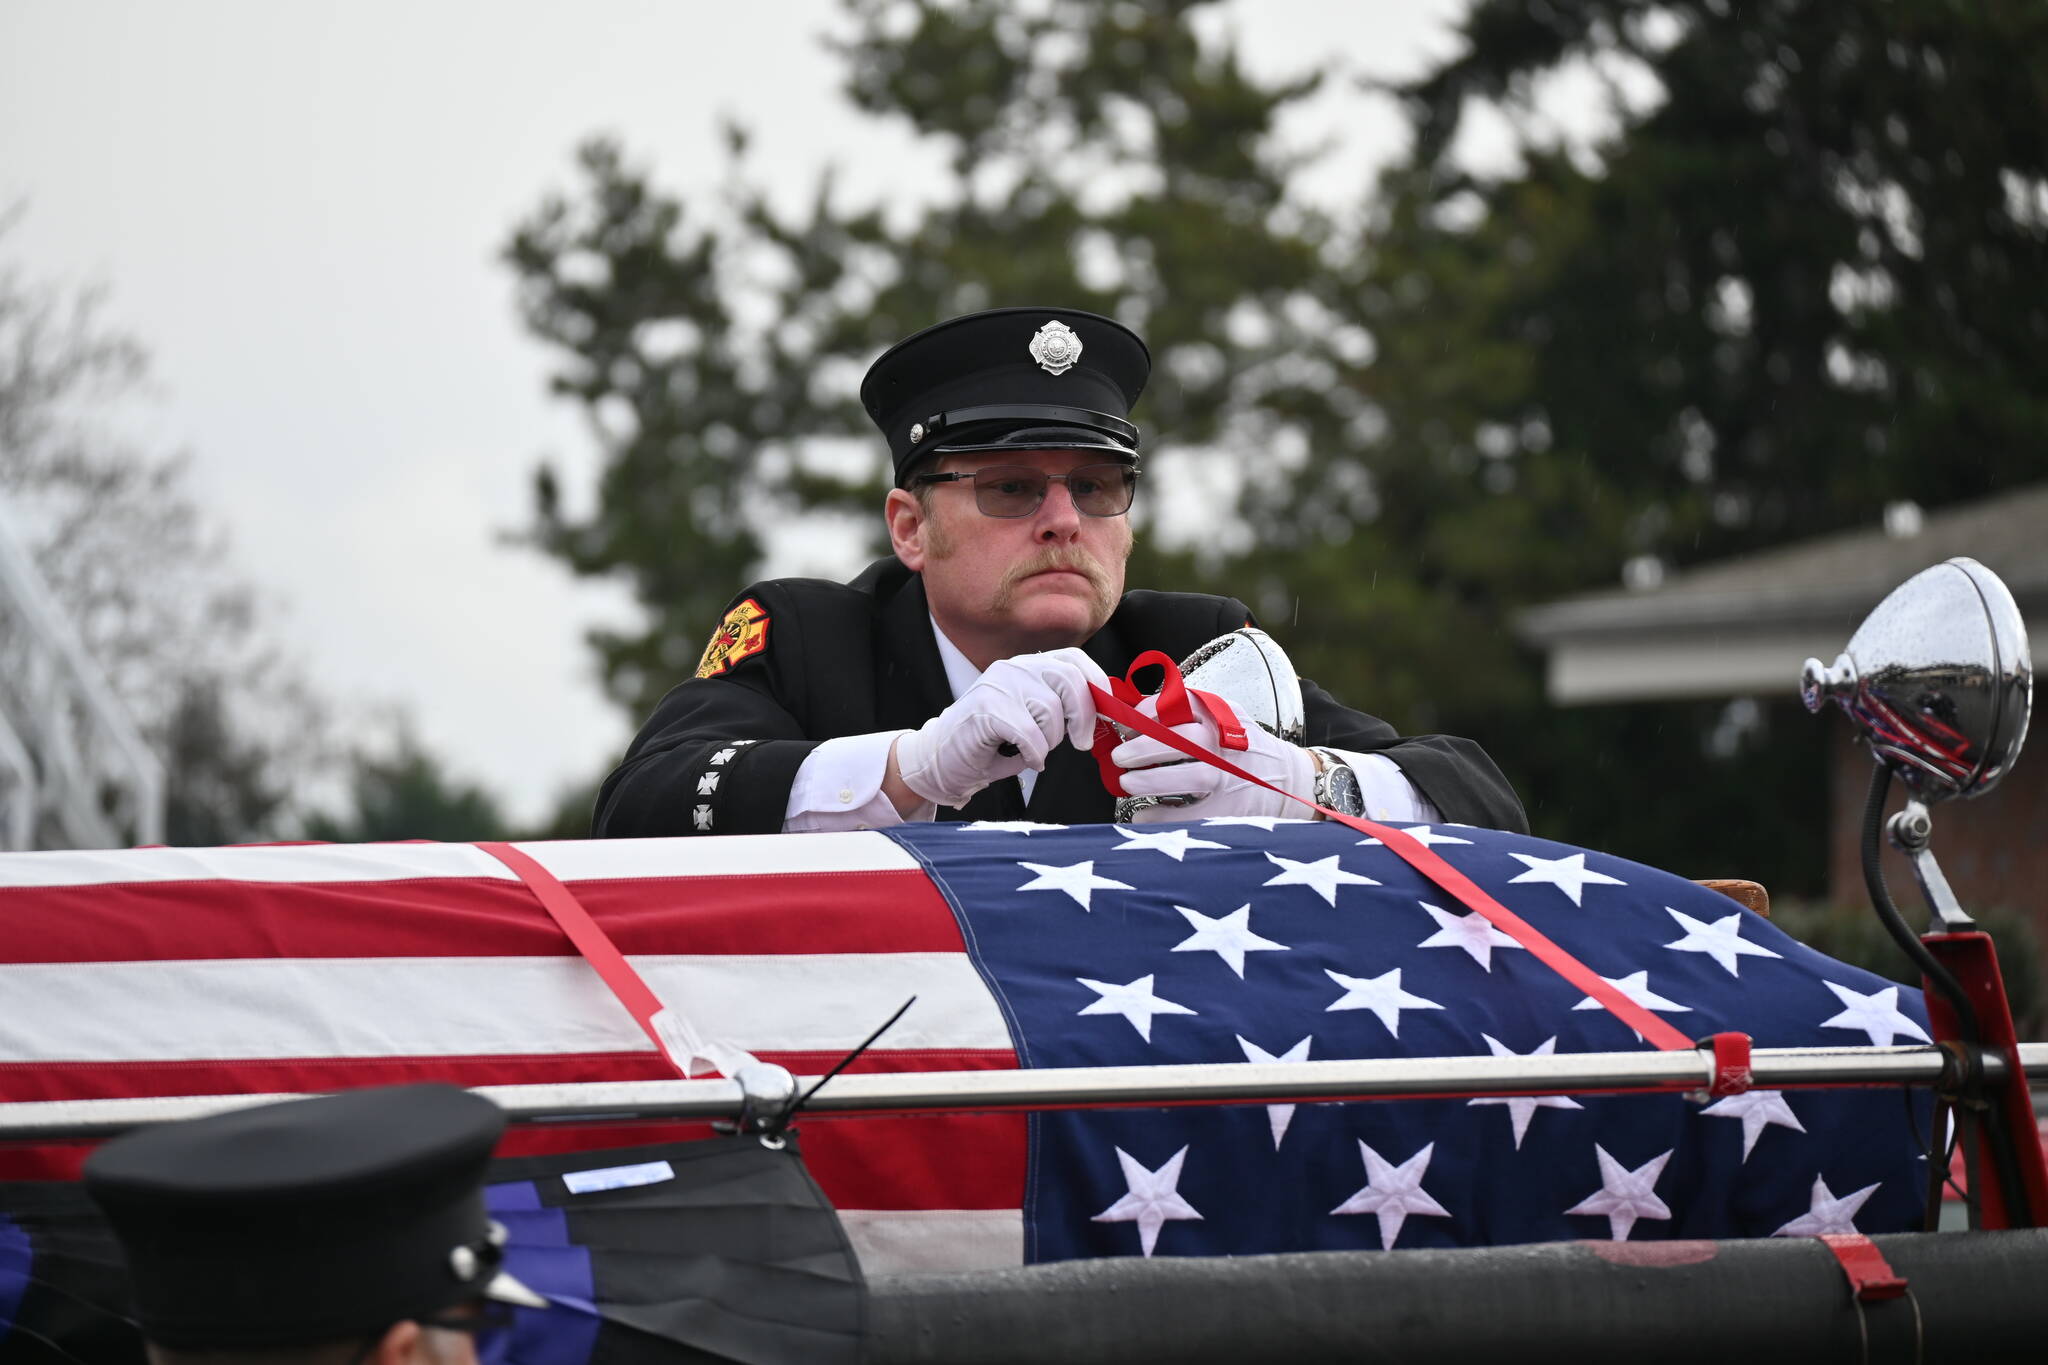 Scott Dickson, longtime firefighting partner of Capt. Charles Chad Cate, removes straps securing Cate’s casket at a memorial Saturday afternoon for the firefighter who was found deceased while on shift on Jan. 12. (Olympic Peninsula News Group)